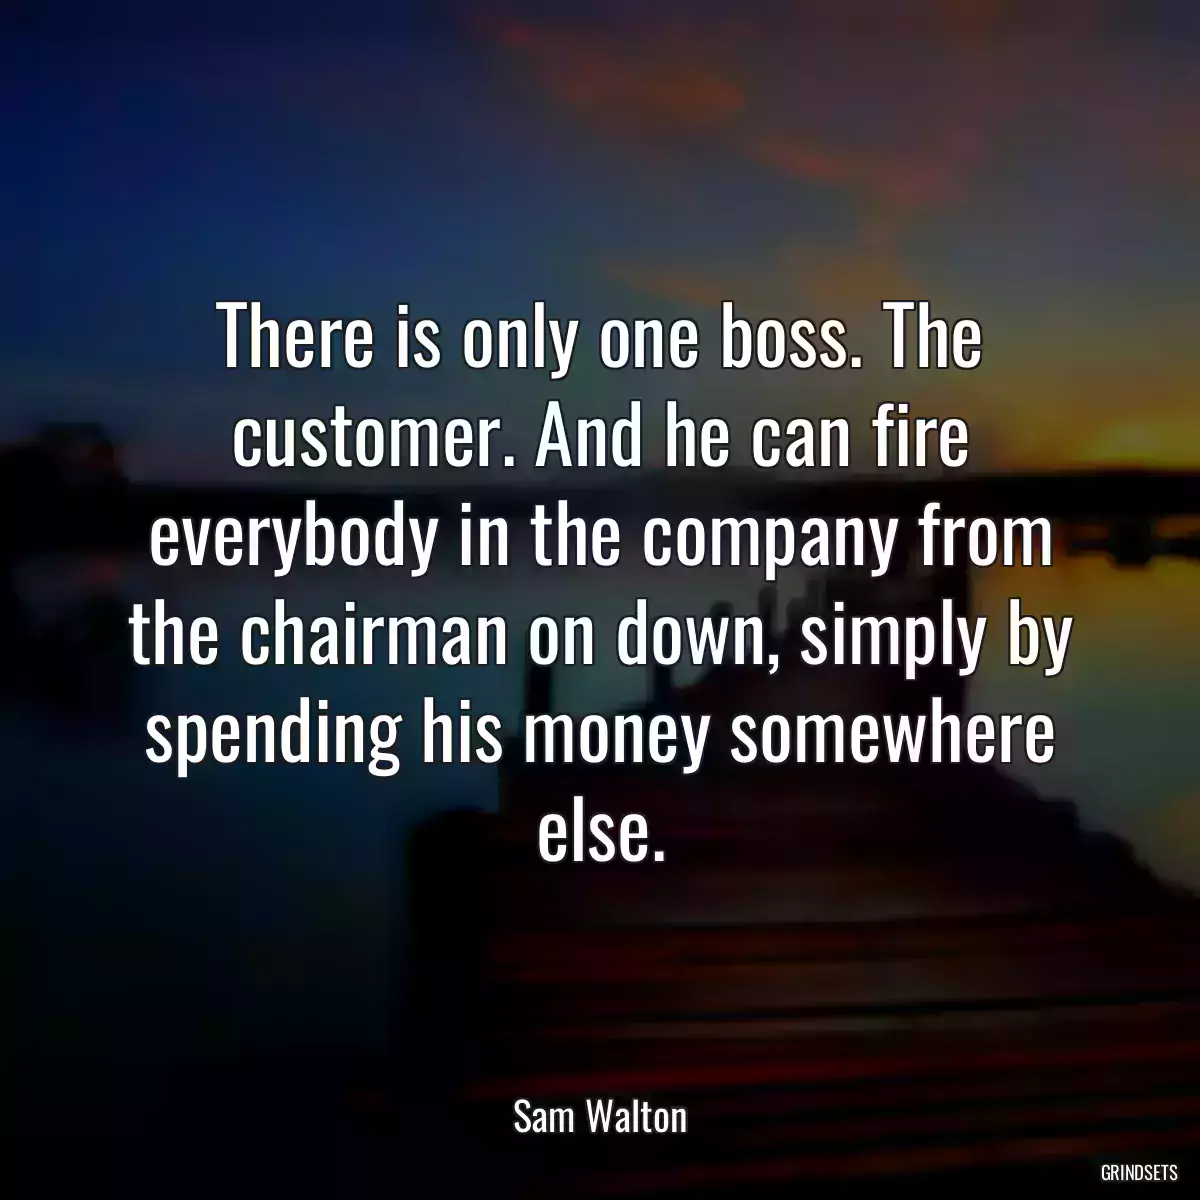 There is only one boss. The customer. And he can fire everybody in the company from the chairman on down, simply by spending his money somewhere else.